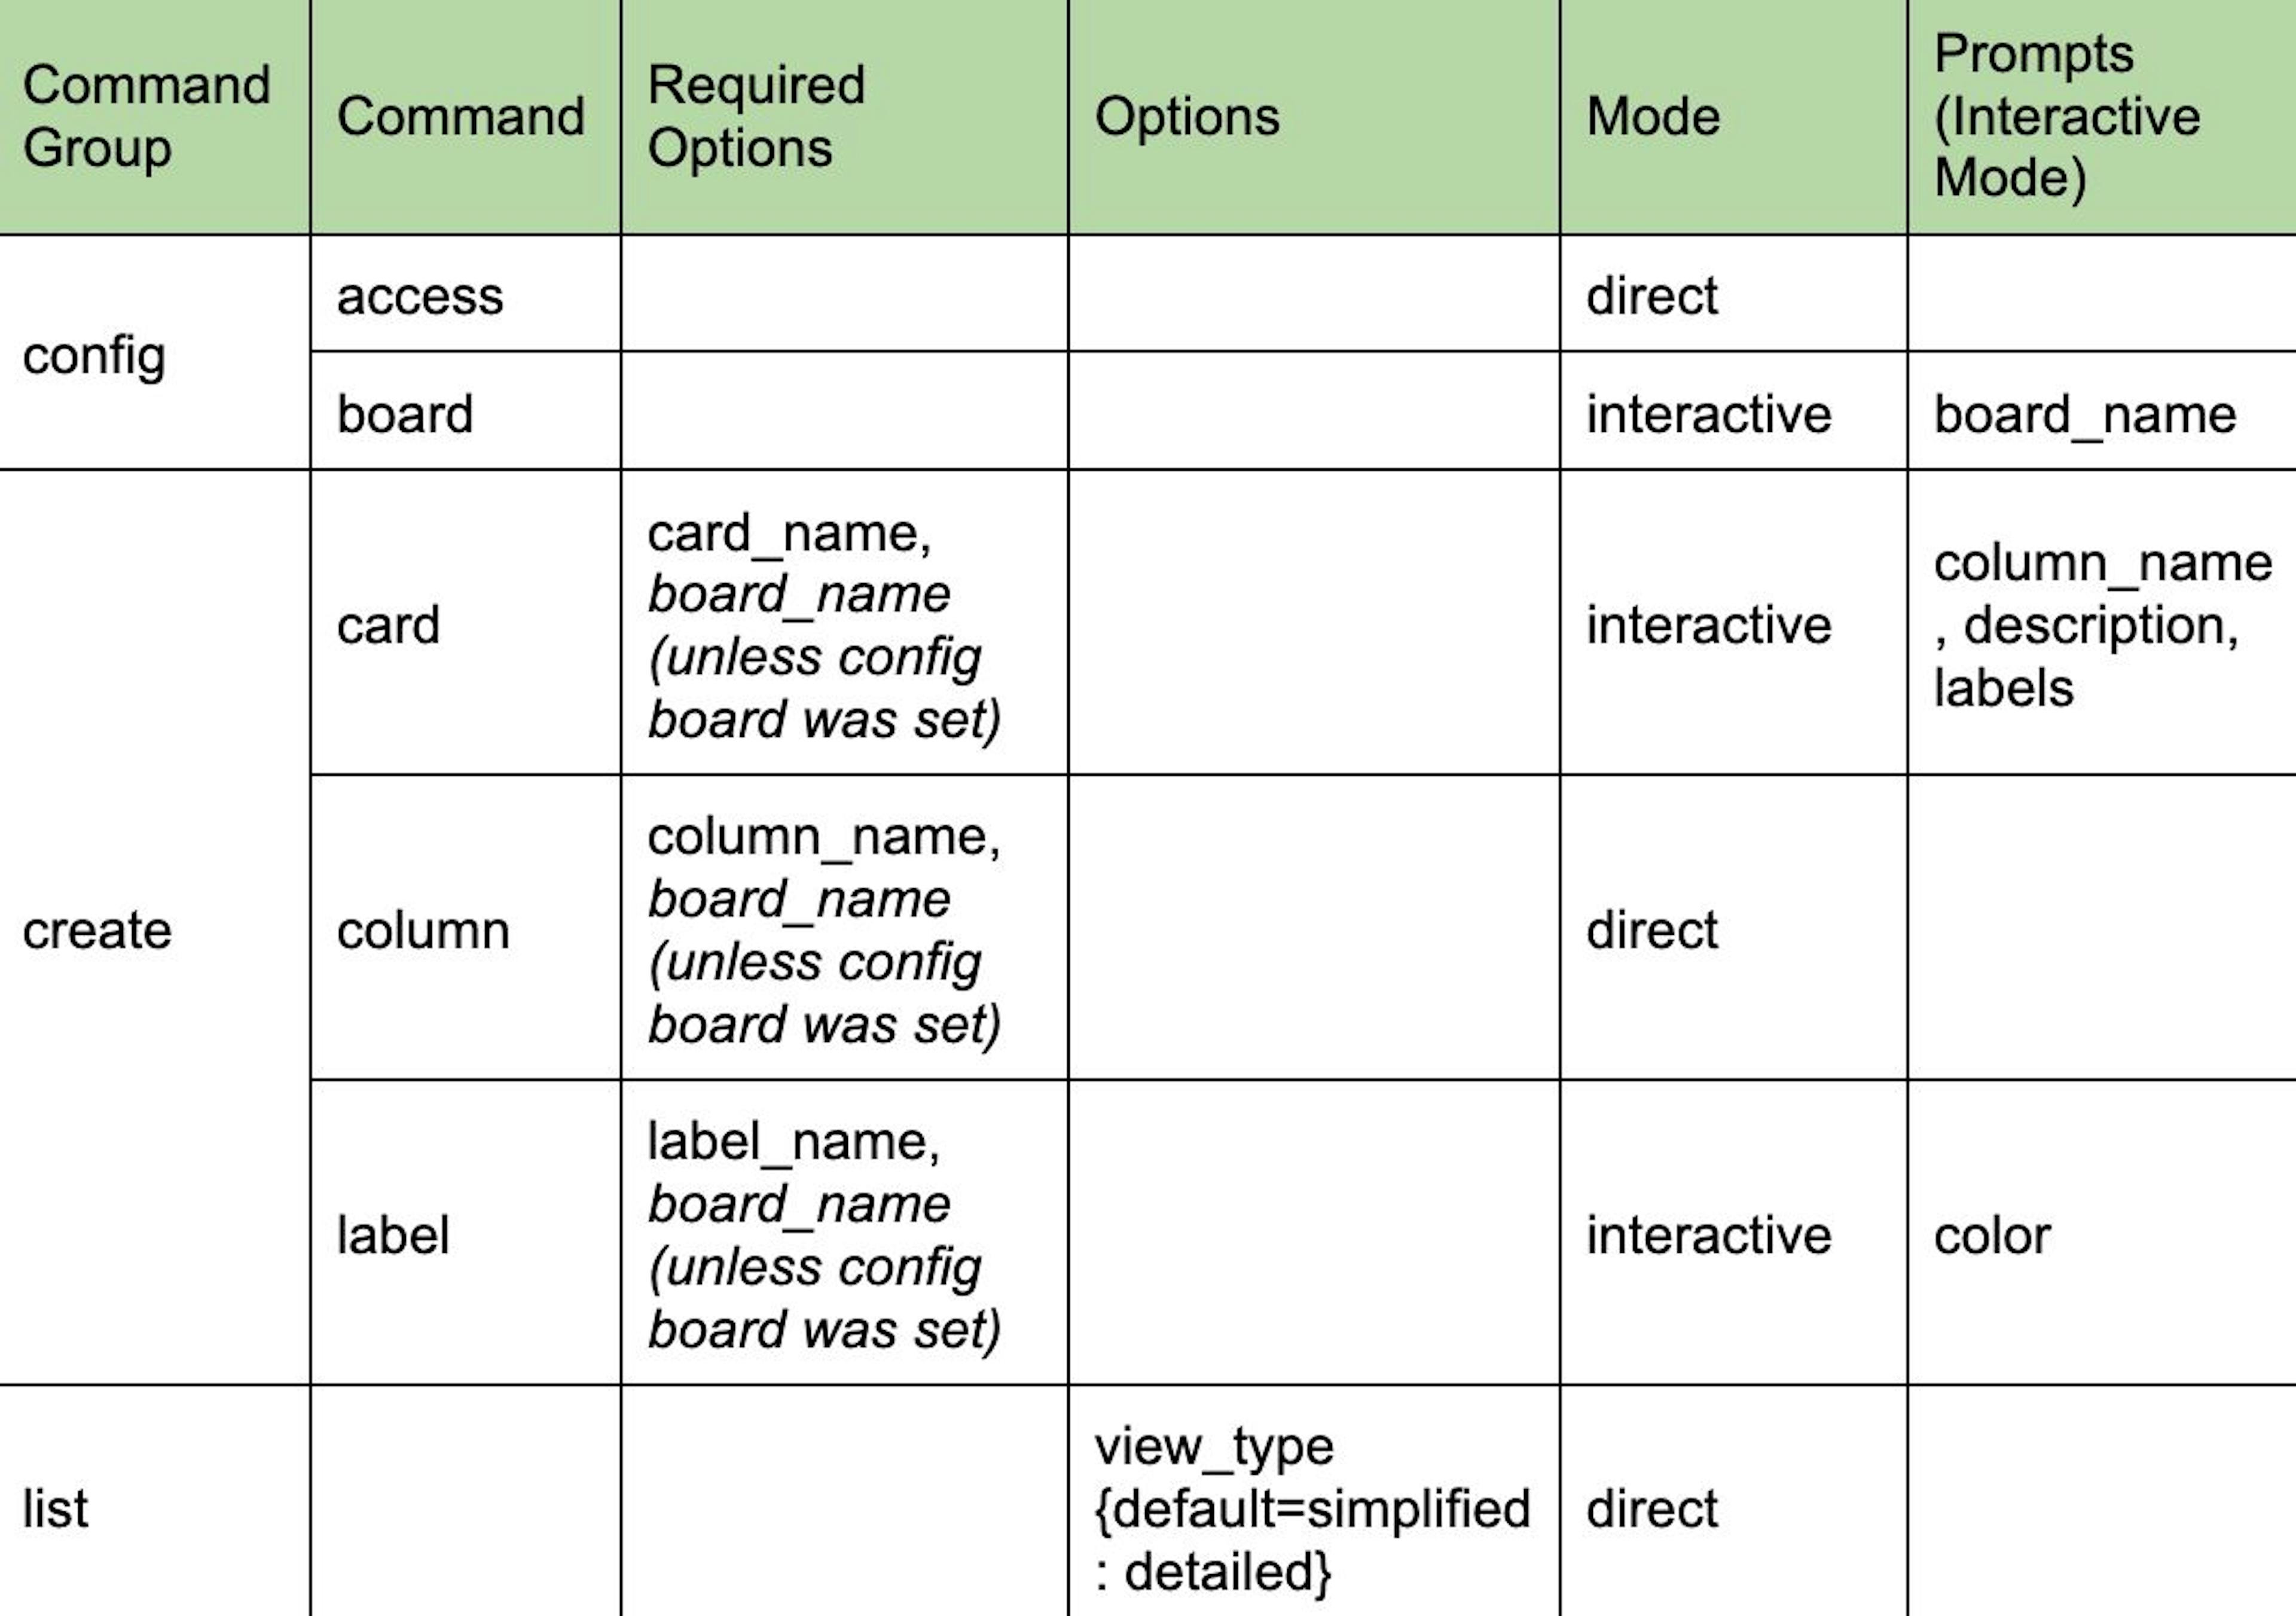 Detailed table view of CLI structure based on requirements